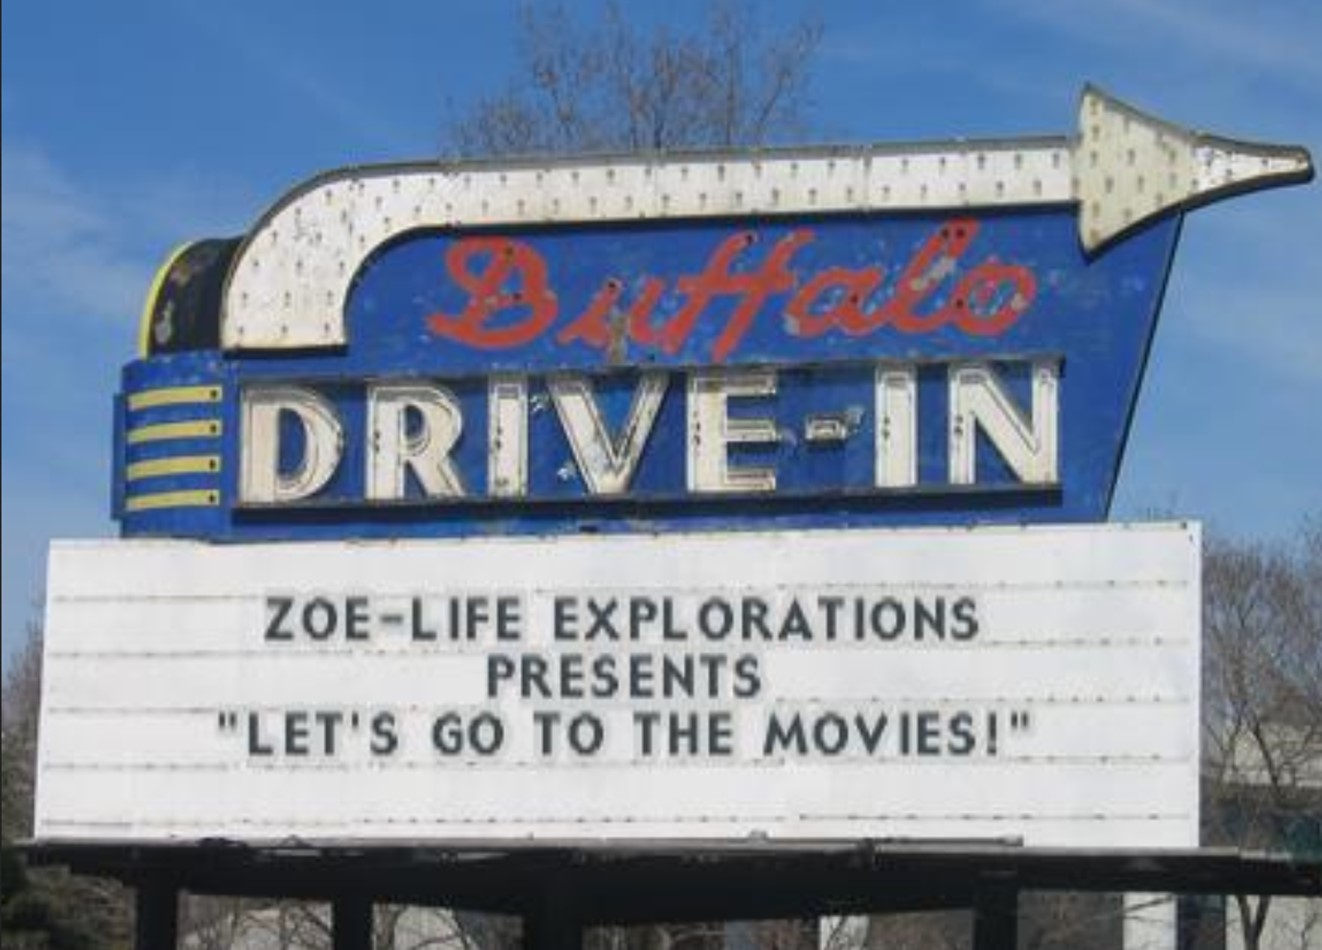 Let's Go to the Movies (no border).jpg